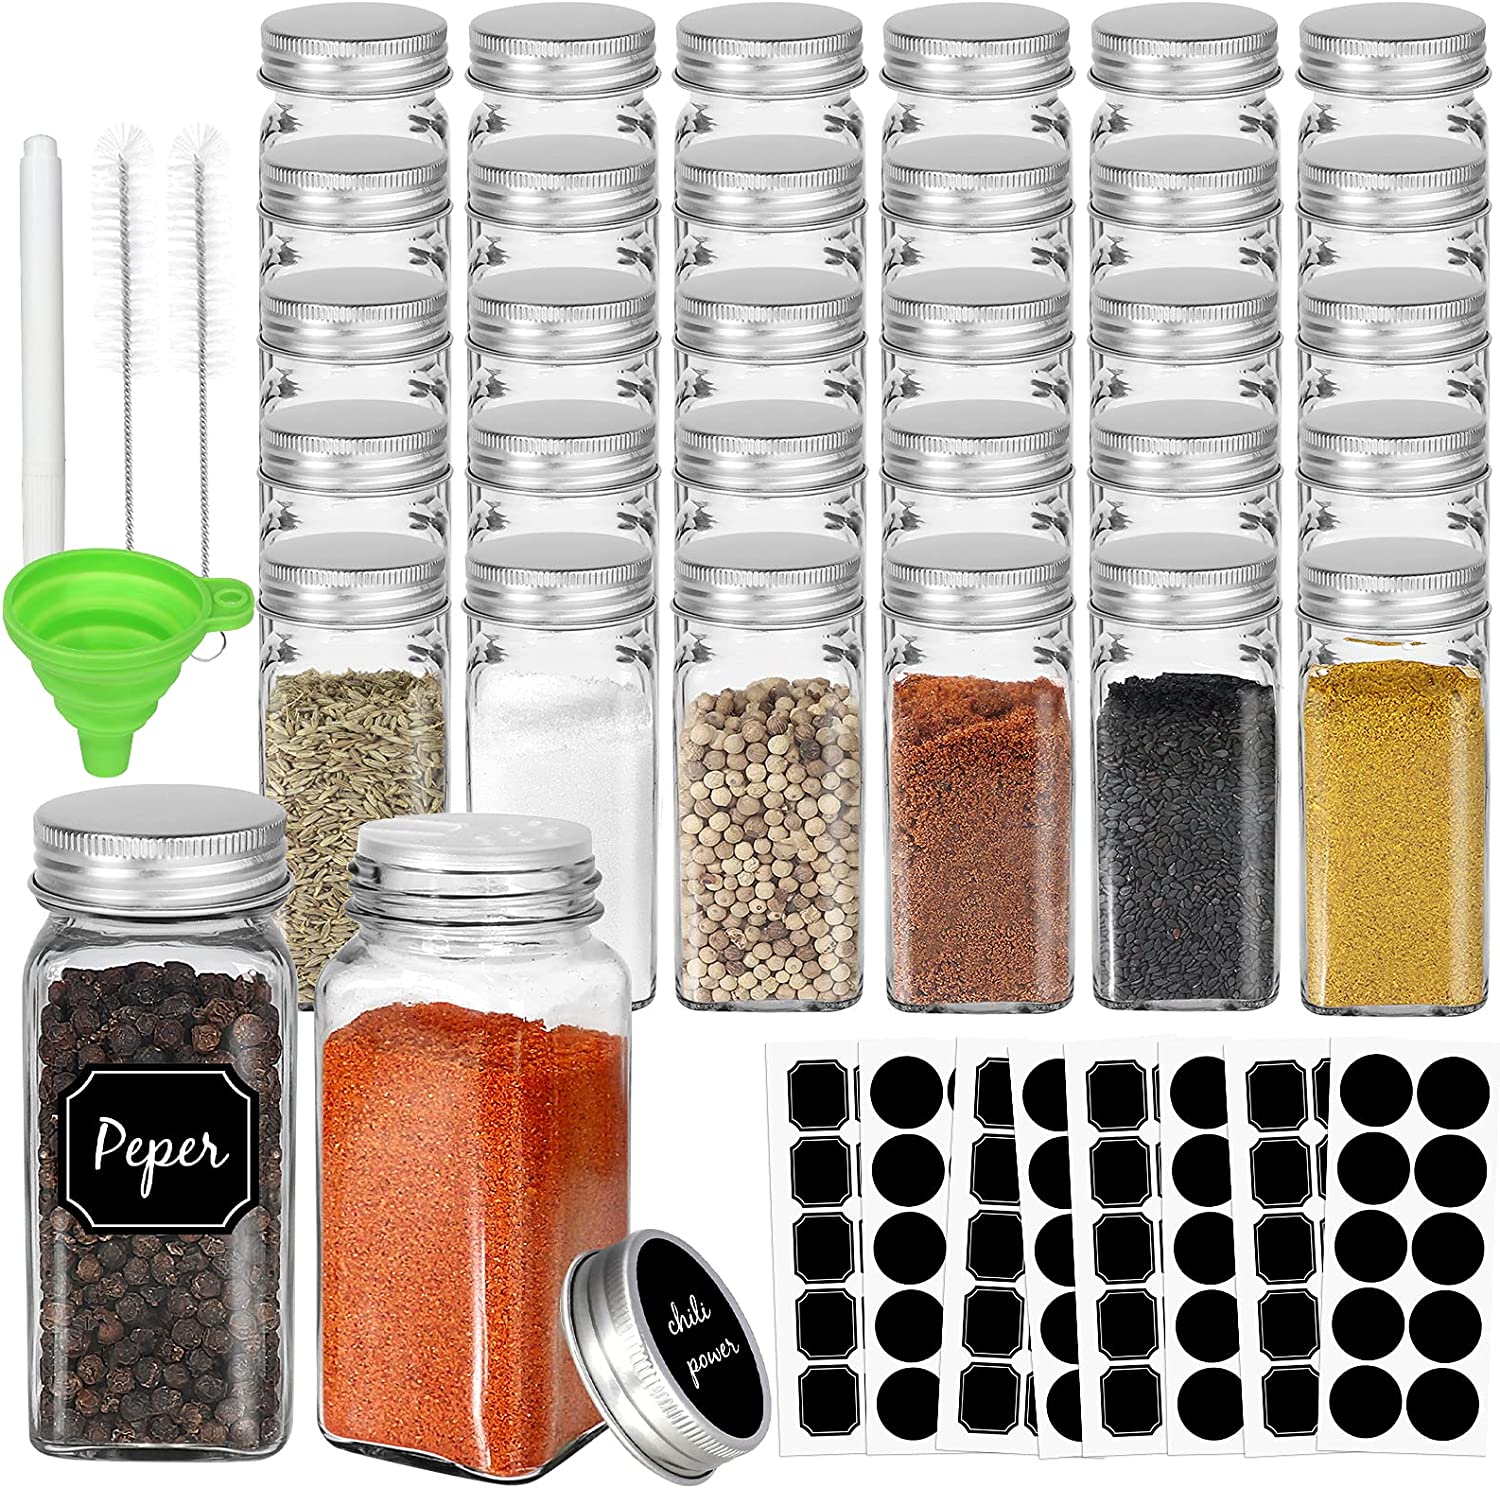 NETANY 25 Pcs Spice Jars with Labels and Shaker Lids - Minimalist Stickers,  Collapsible Funnel, 4oz Seasoning Containers Bottles for Spice Rack